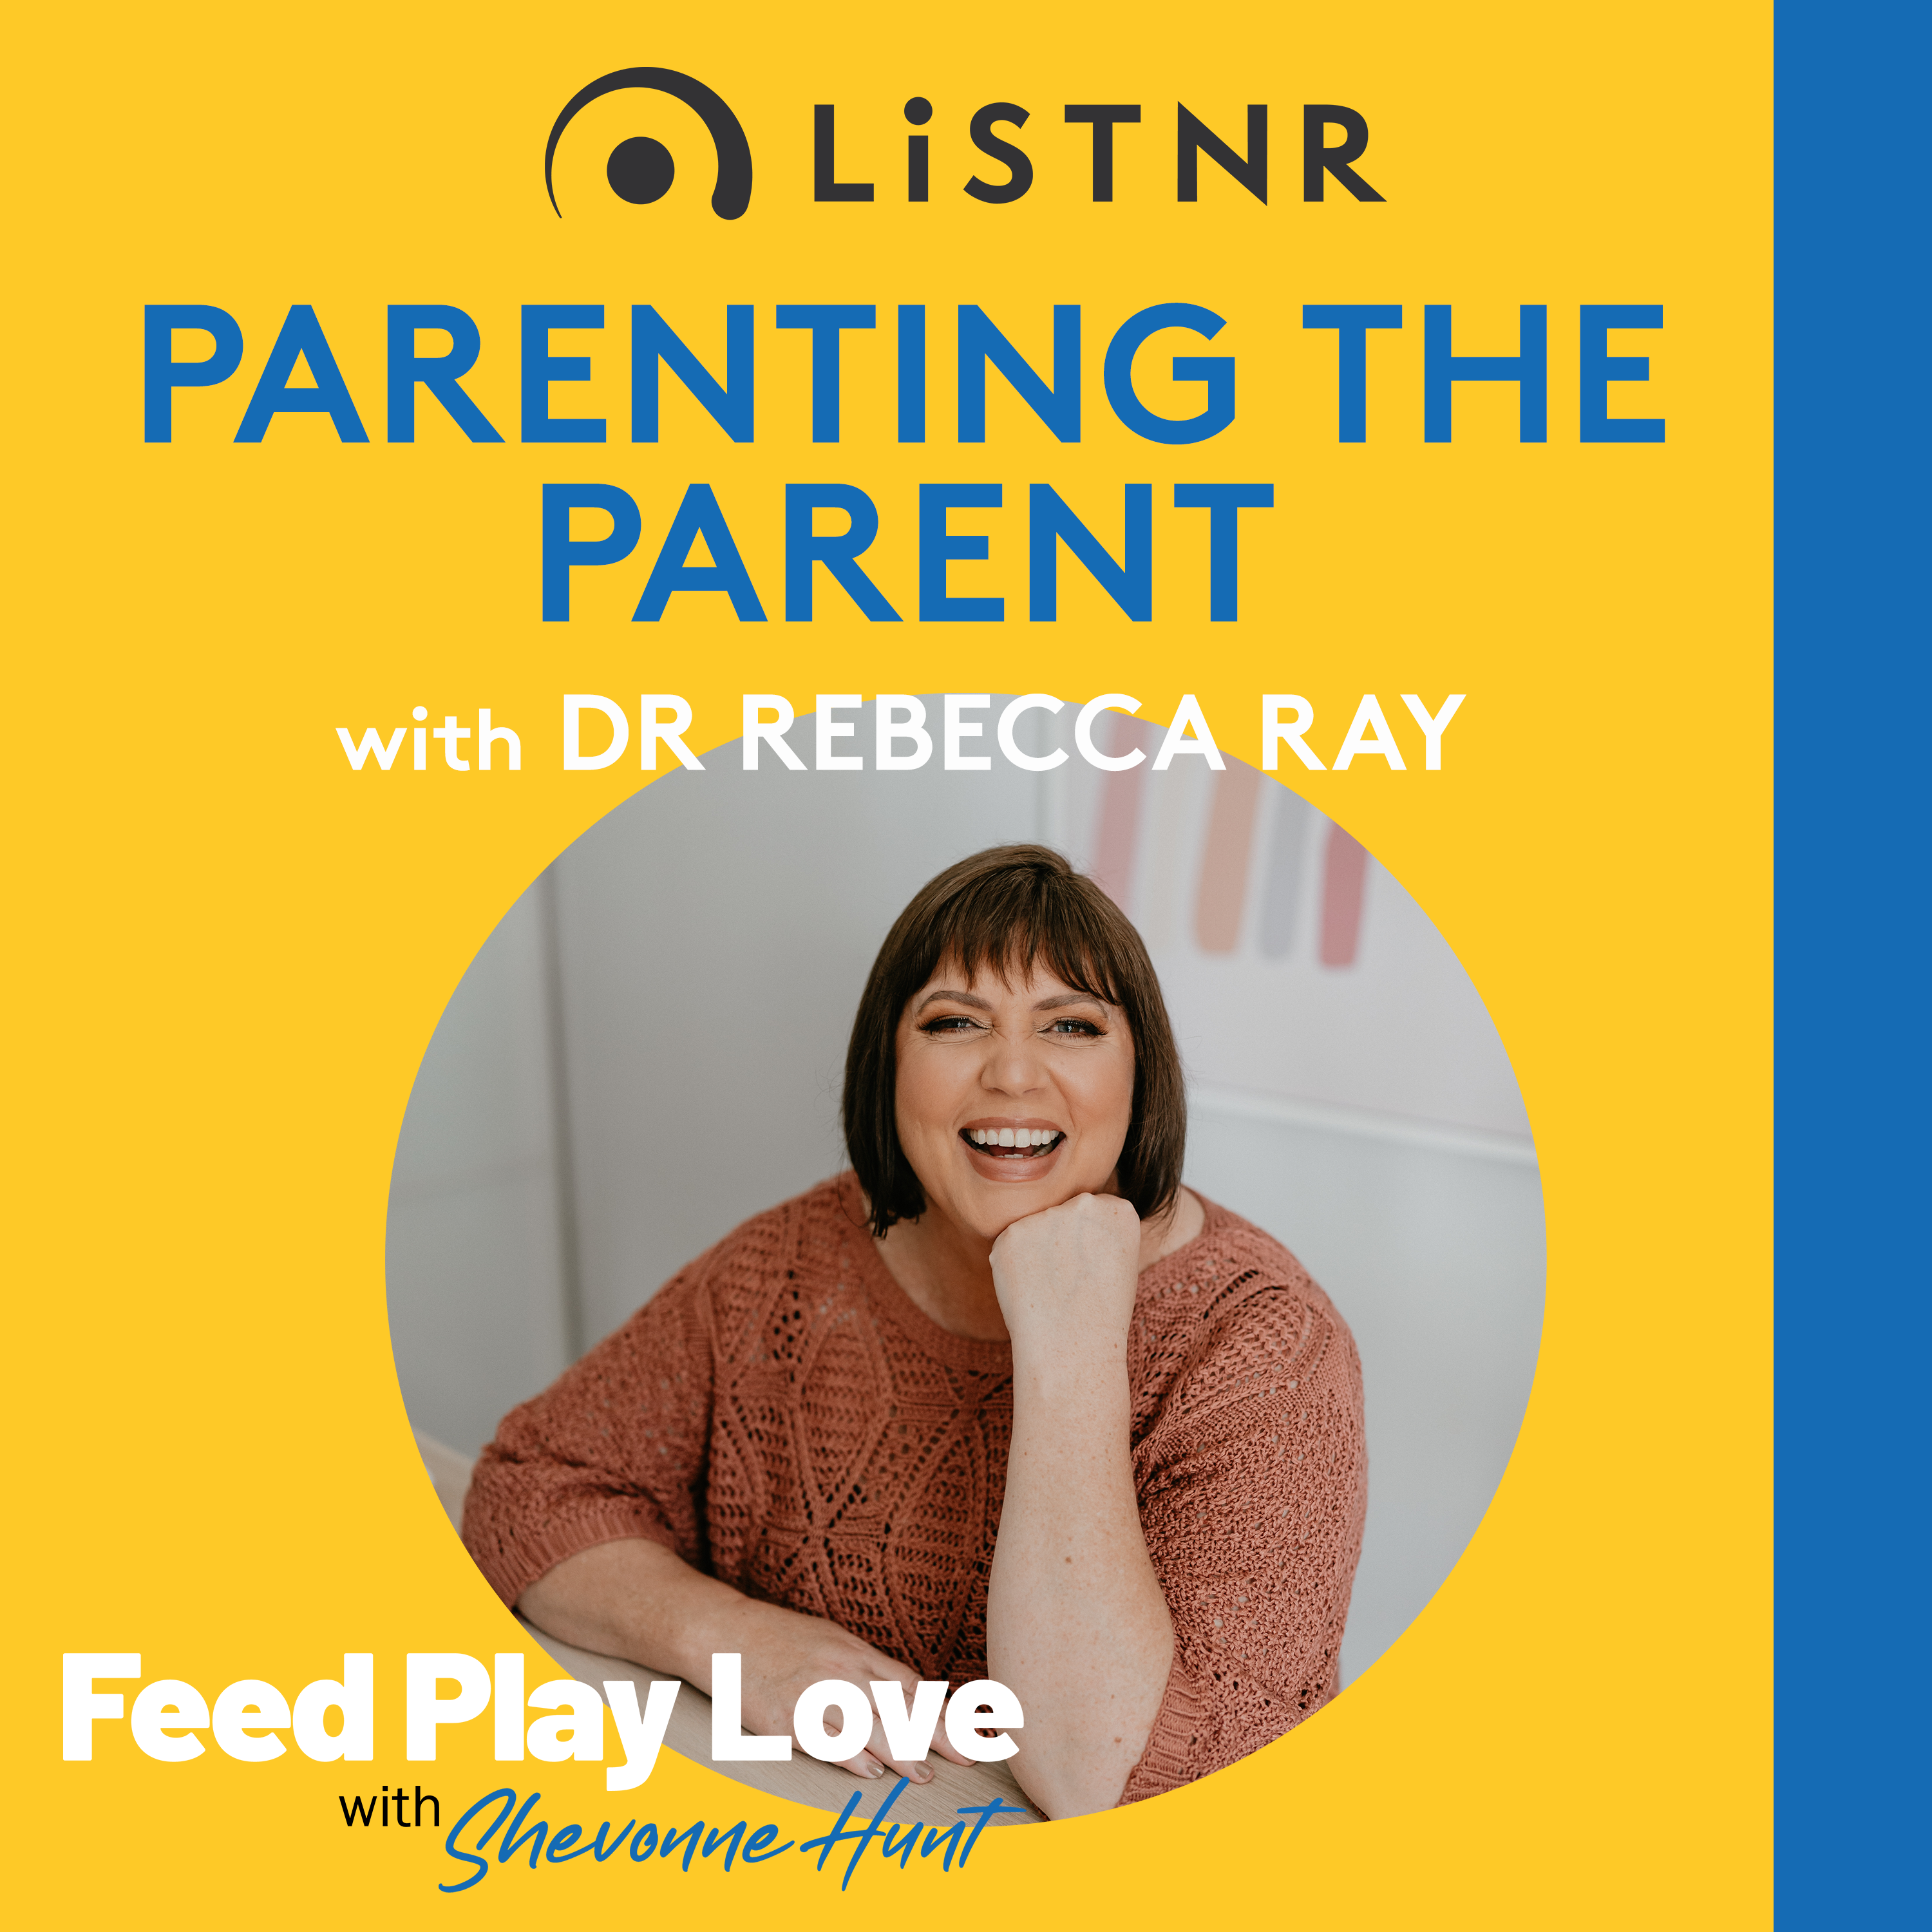 The grandparent challenge (Parenting the Parent with Dr Rebecca Ray)